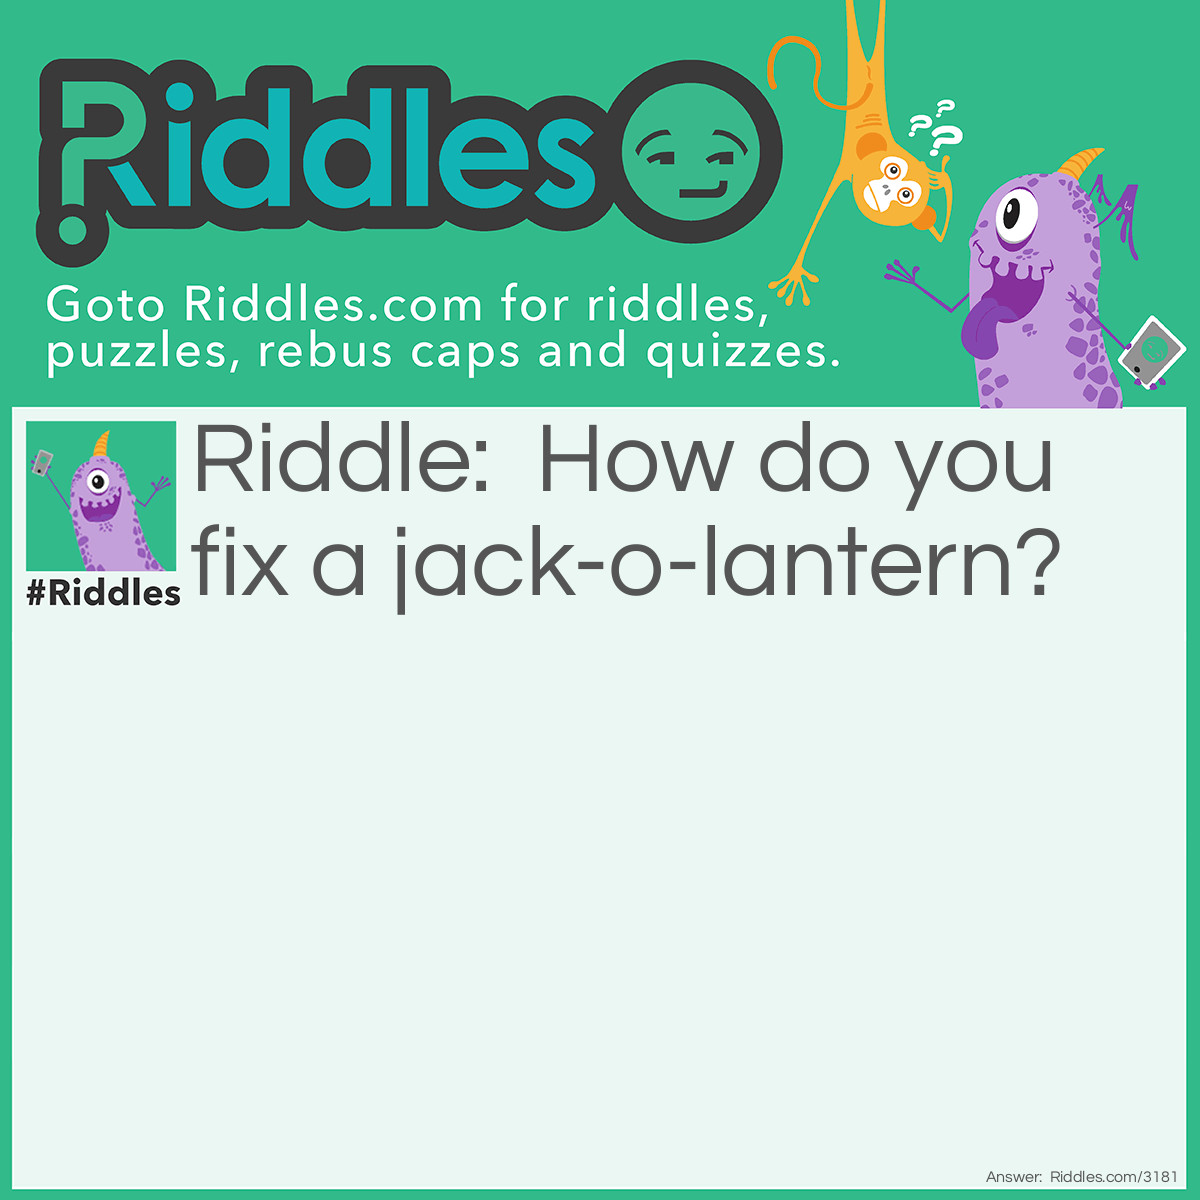 Riddle: How do you fix a broken jack-o-lantern? Answer: With a pumpkin patch.